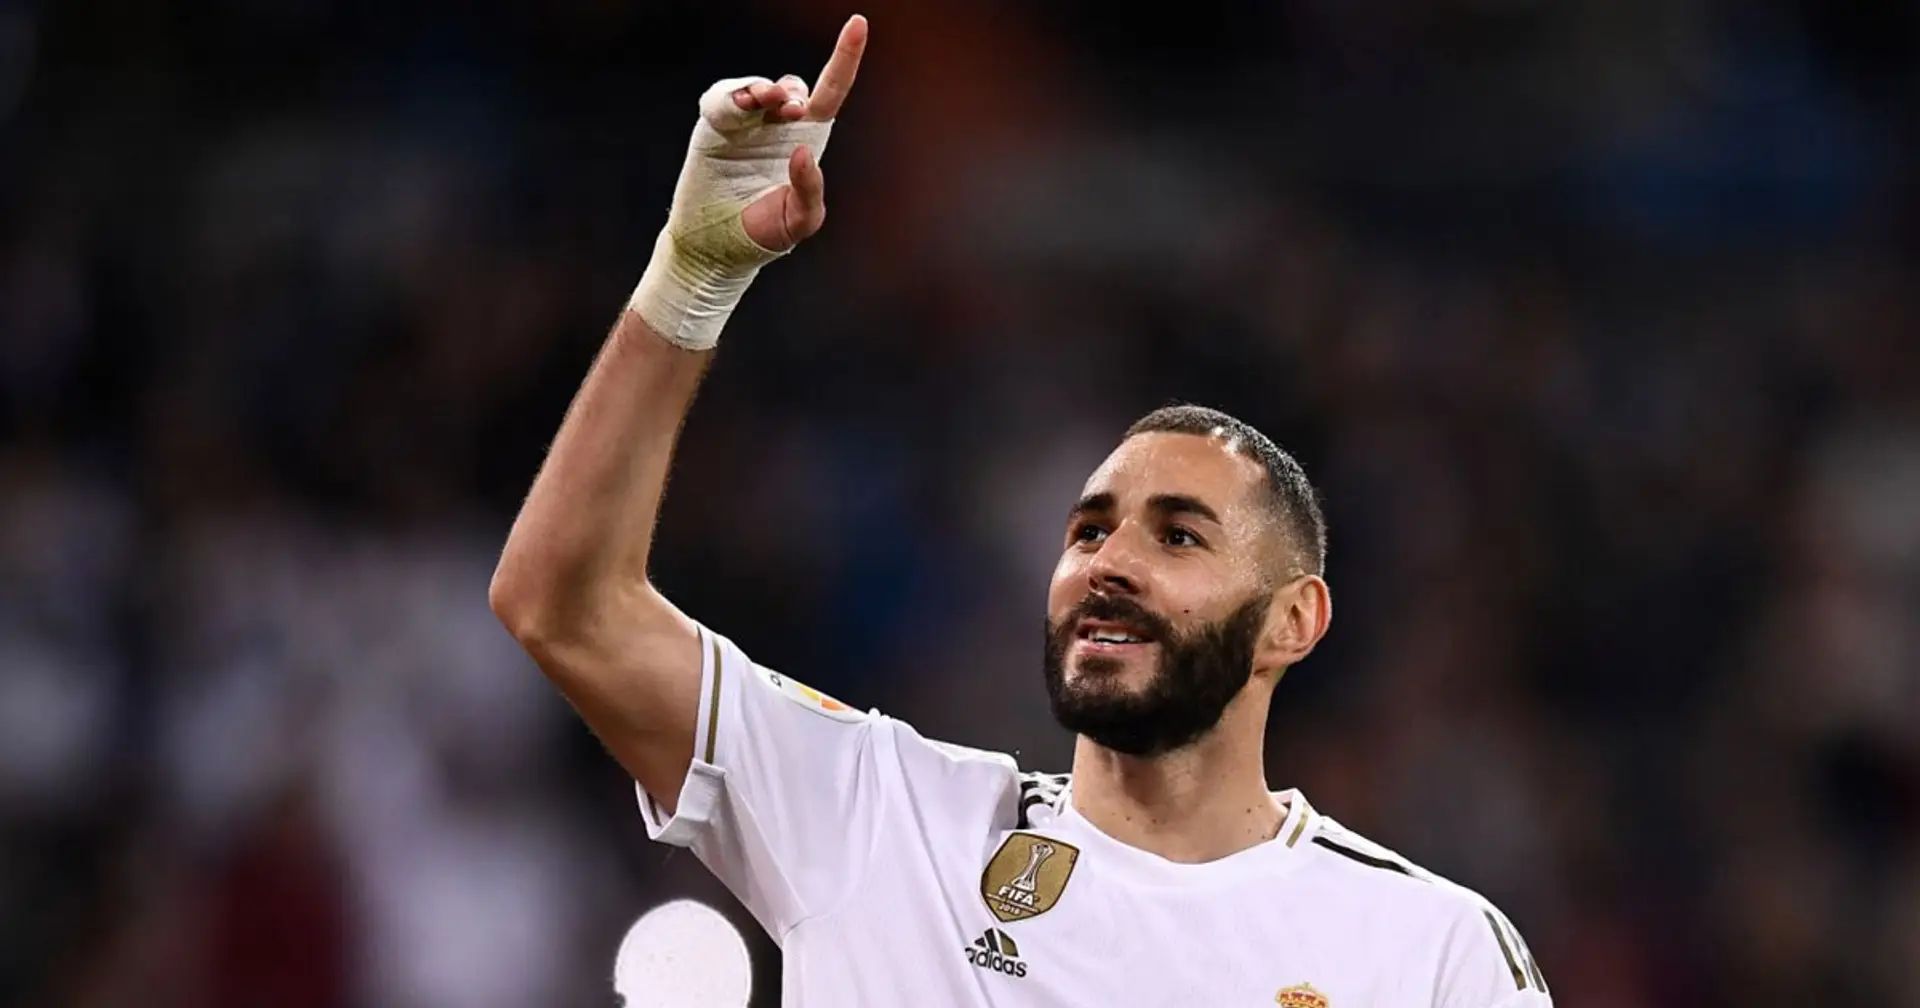 'He's one of the best strikers in the world': Marc Bartra singles out Karim Benzema for praise ahead of Real Madrid clash